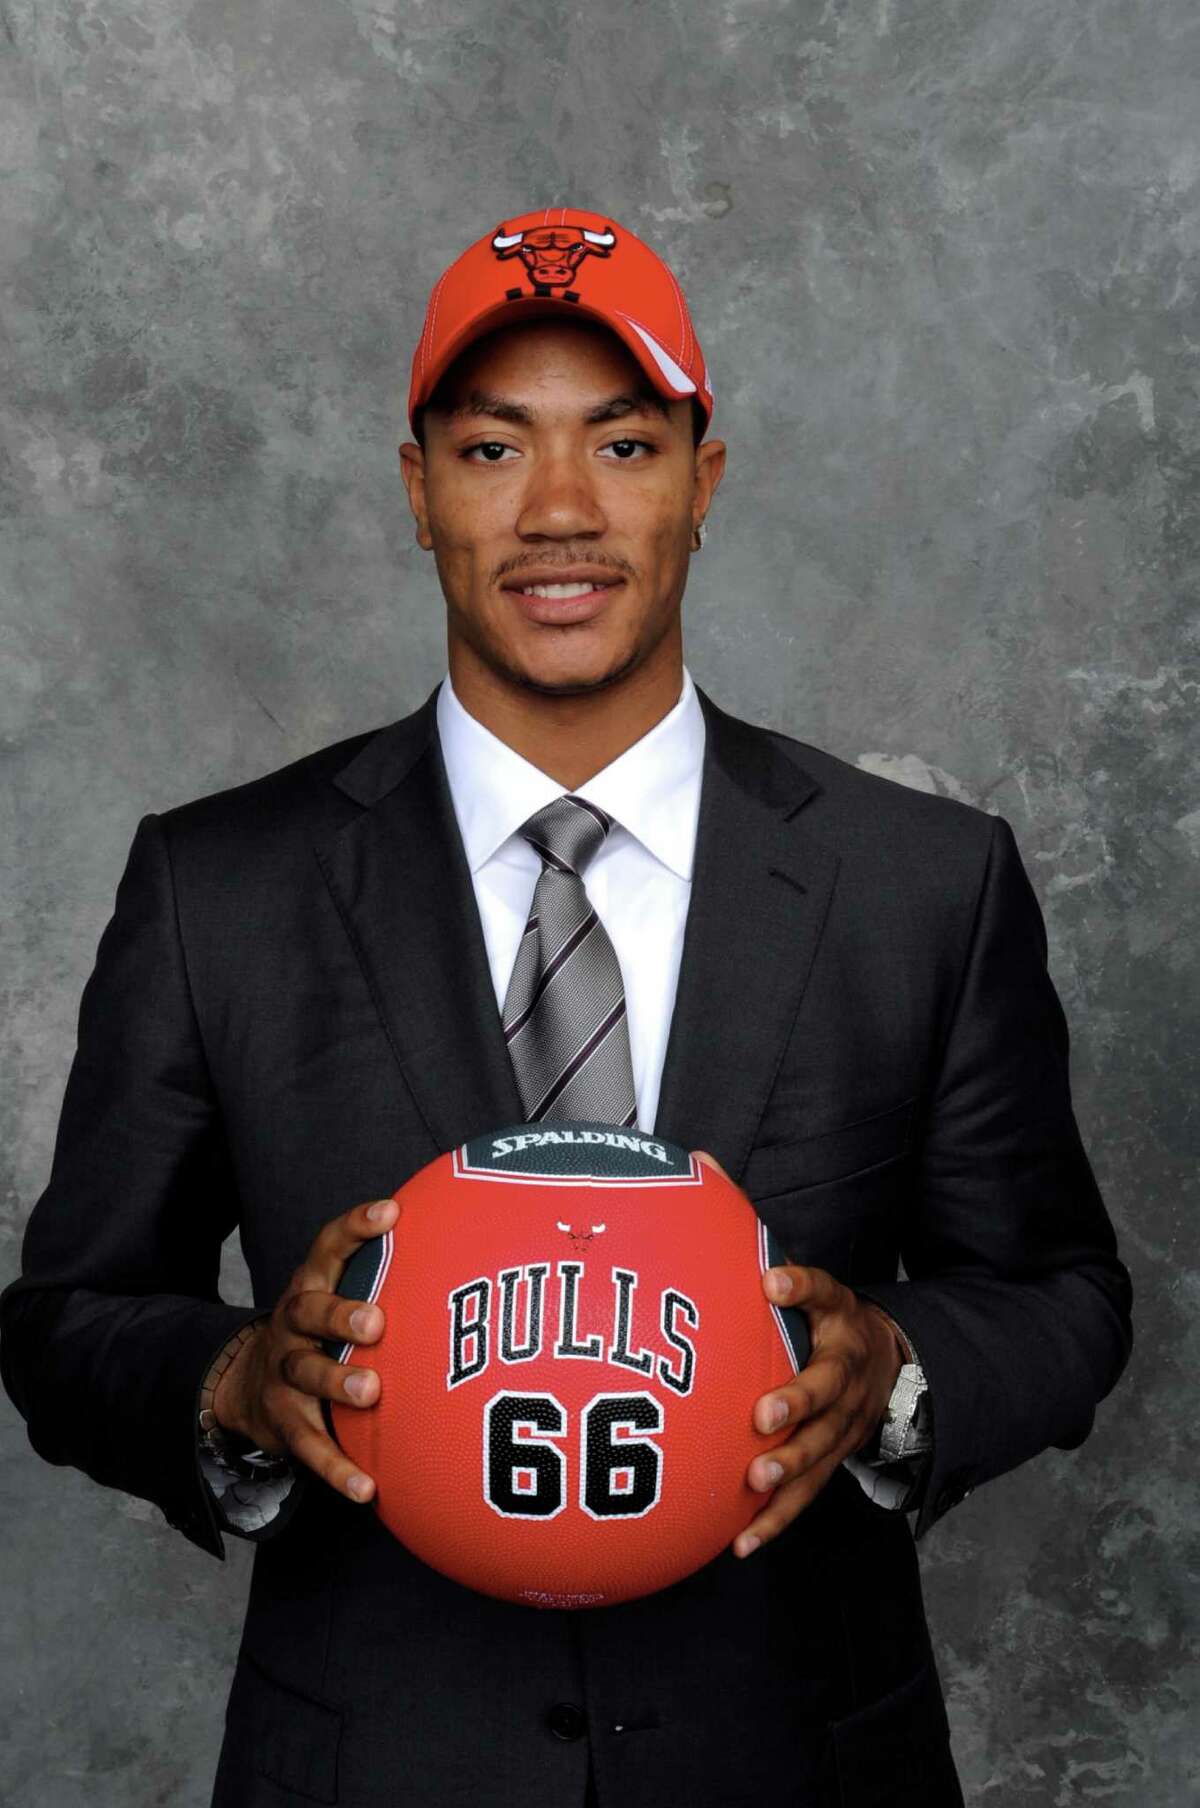 Derrick Rose selected number one overall by the Chicago Bulls poses for a portrait backstage during the 2008 NBA Draft on June 26, 2008 at the WaMu Theatre at Madison Square Garden in New York City. NOTE TO USER: User expressly acknowledges and agrees that, by downloading and or using this photograph, User is consenting to the terms and conditions of the Getty Images License Agreement. Mandatory Copyright Notice: Copyright 2008 NBAE (Photo by Jennifer Pottheiser /NBAE via Getty Images)